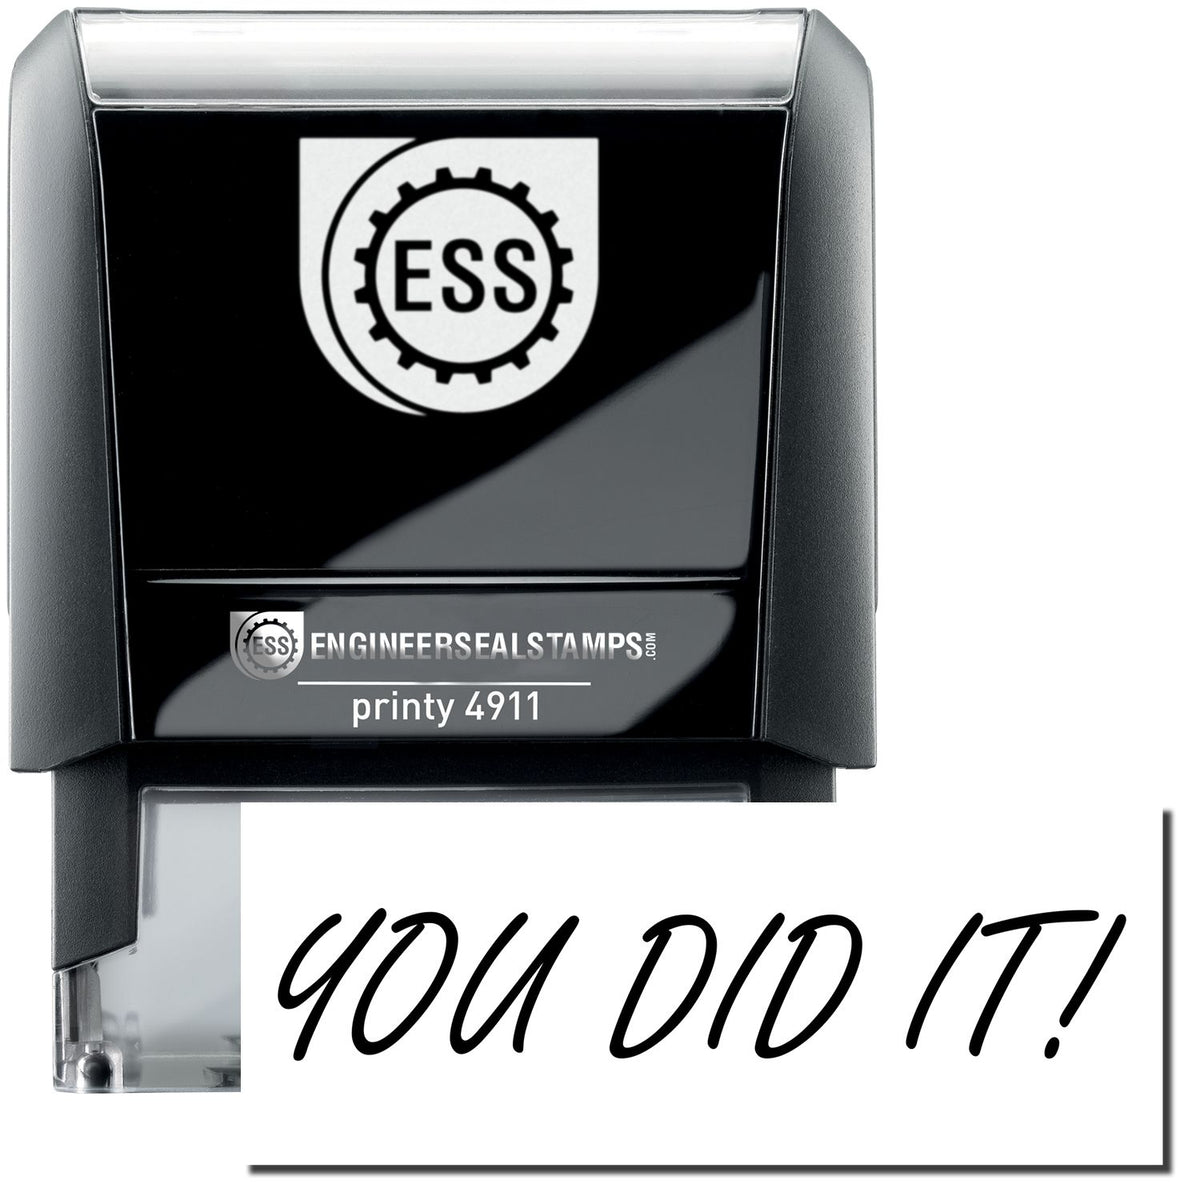 A self-inking stamp with a stamped image showing how the text &quot;YOU DID IT!&quot; is displayed after stamping.